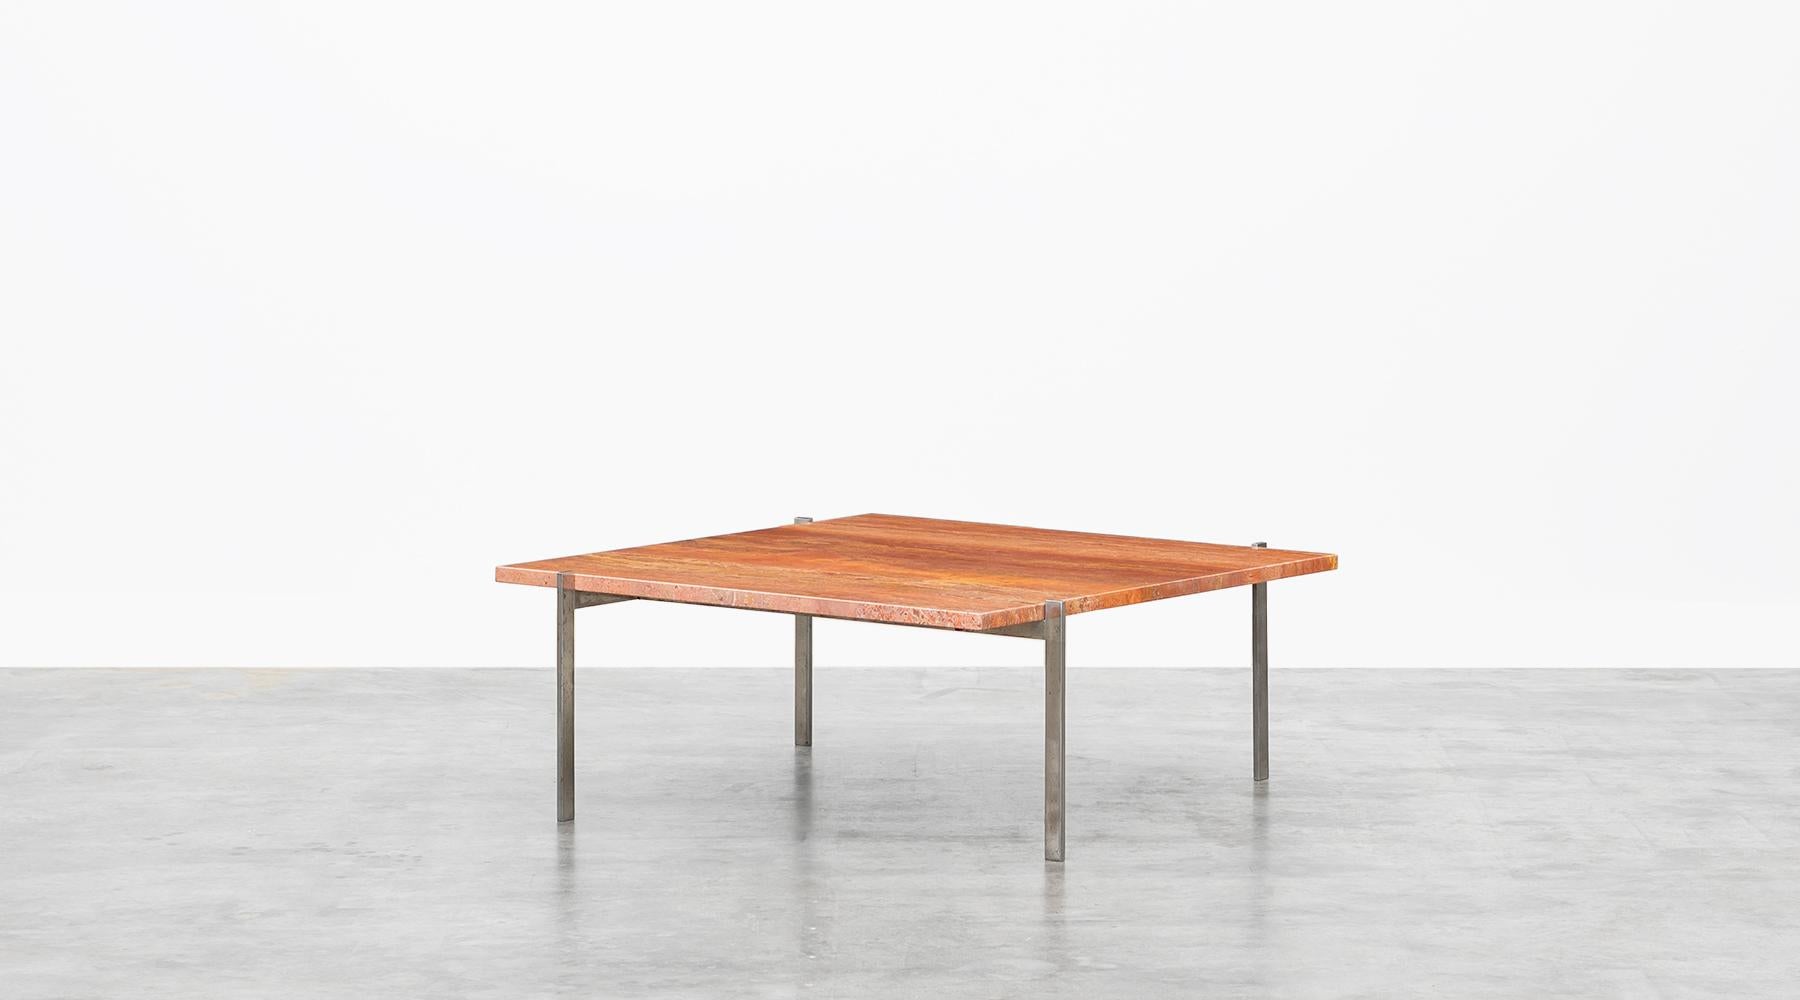 Fantastic square coffee table designed by Danish Poul Kjaerholm in 1956. This table has a brushed matte chrome-plated steel frame and comes with a very nice rose-colored marble top that is in good condition with minimal wear due to use and age. Very